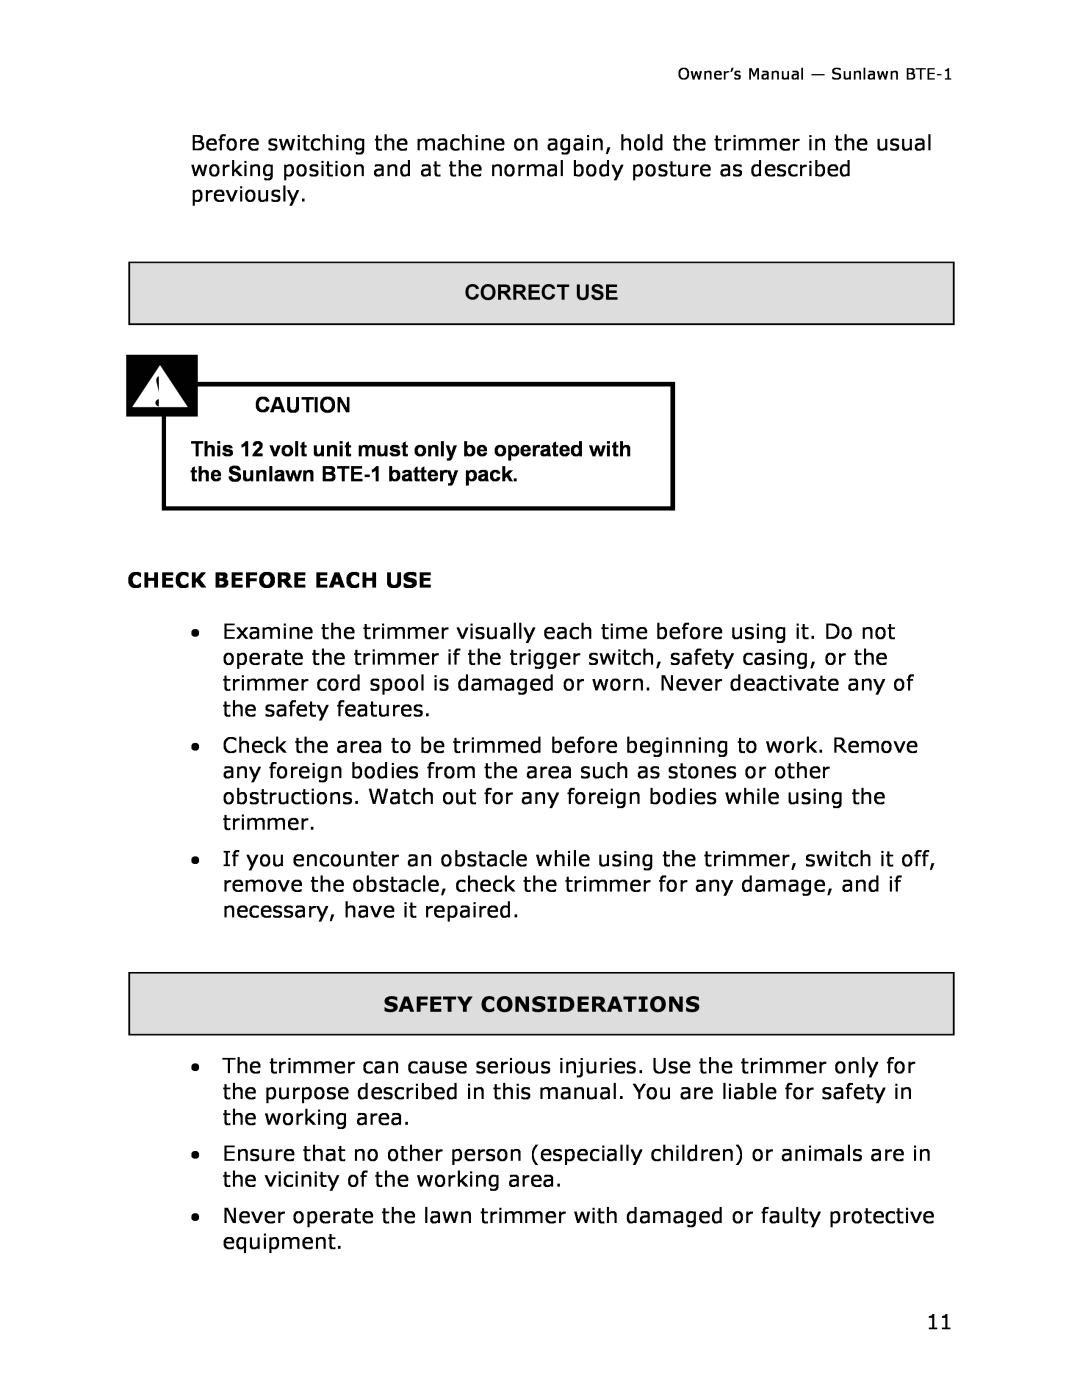 Sun Lawn BTE-1 owner manual Correct Use, Check Before Each Use, Safety Considerations 